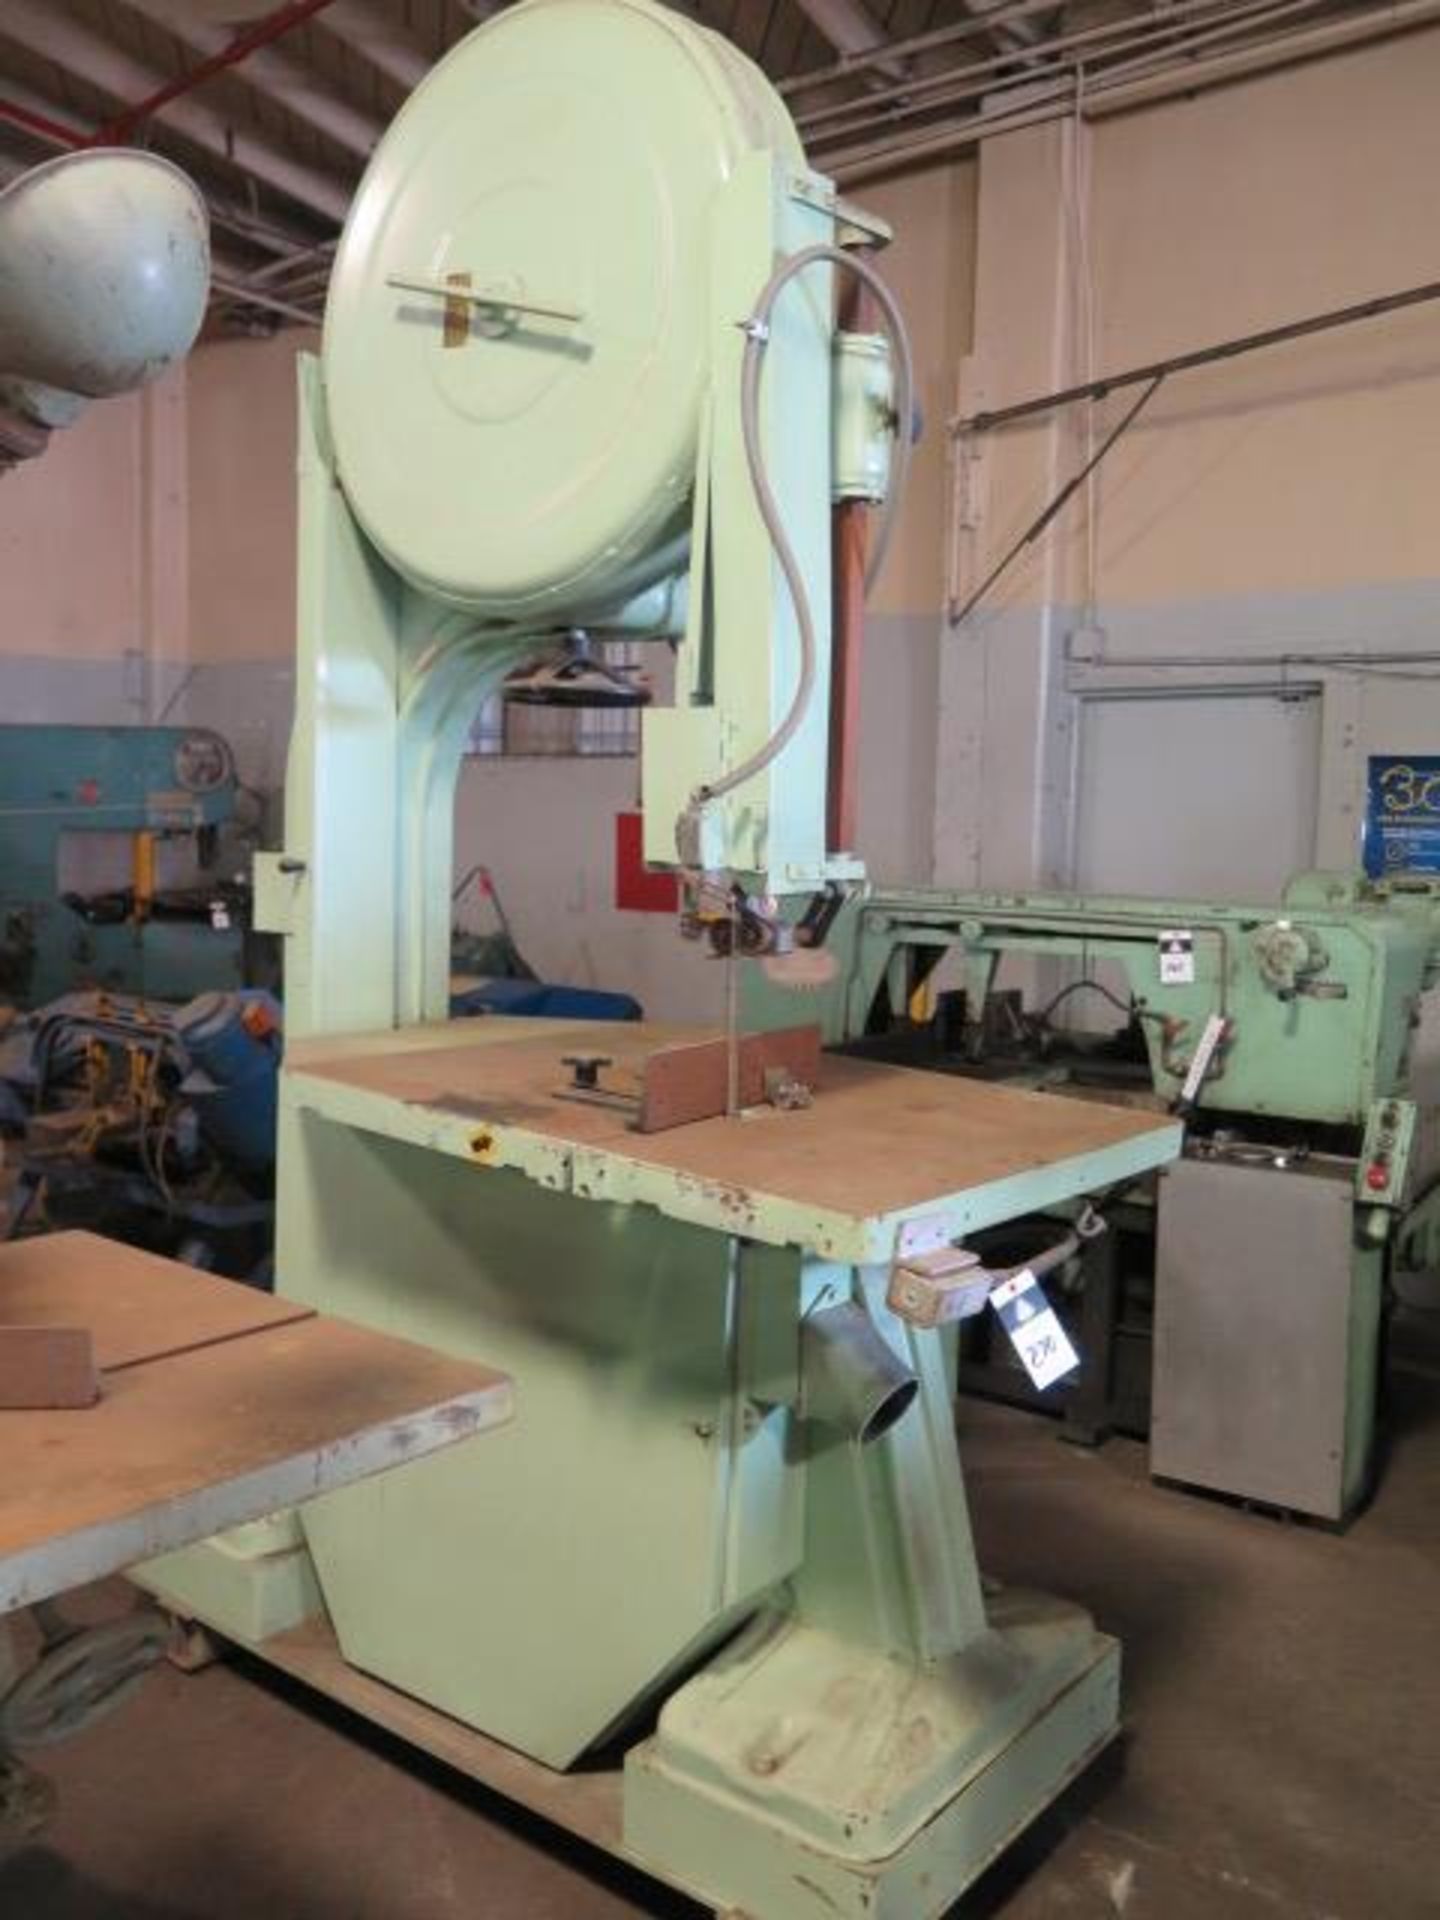 Centauro Brevettata 34" Vertical Band Saw w/ 35" x 42" Table (SOLD AS-IS - NO WARRANTY)